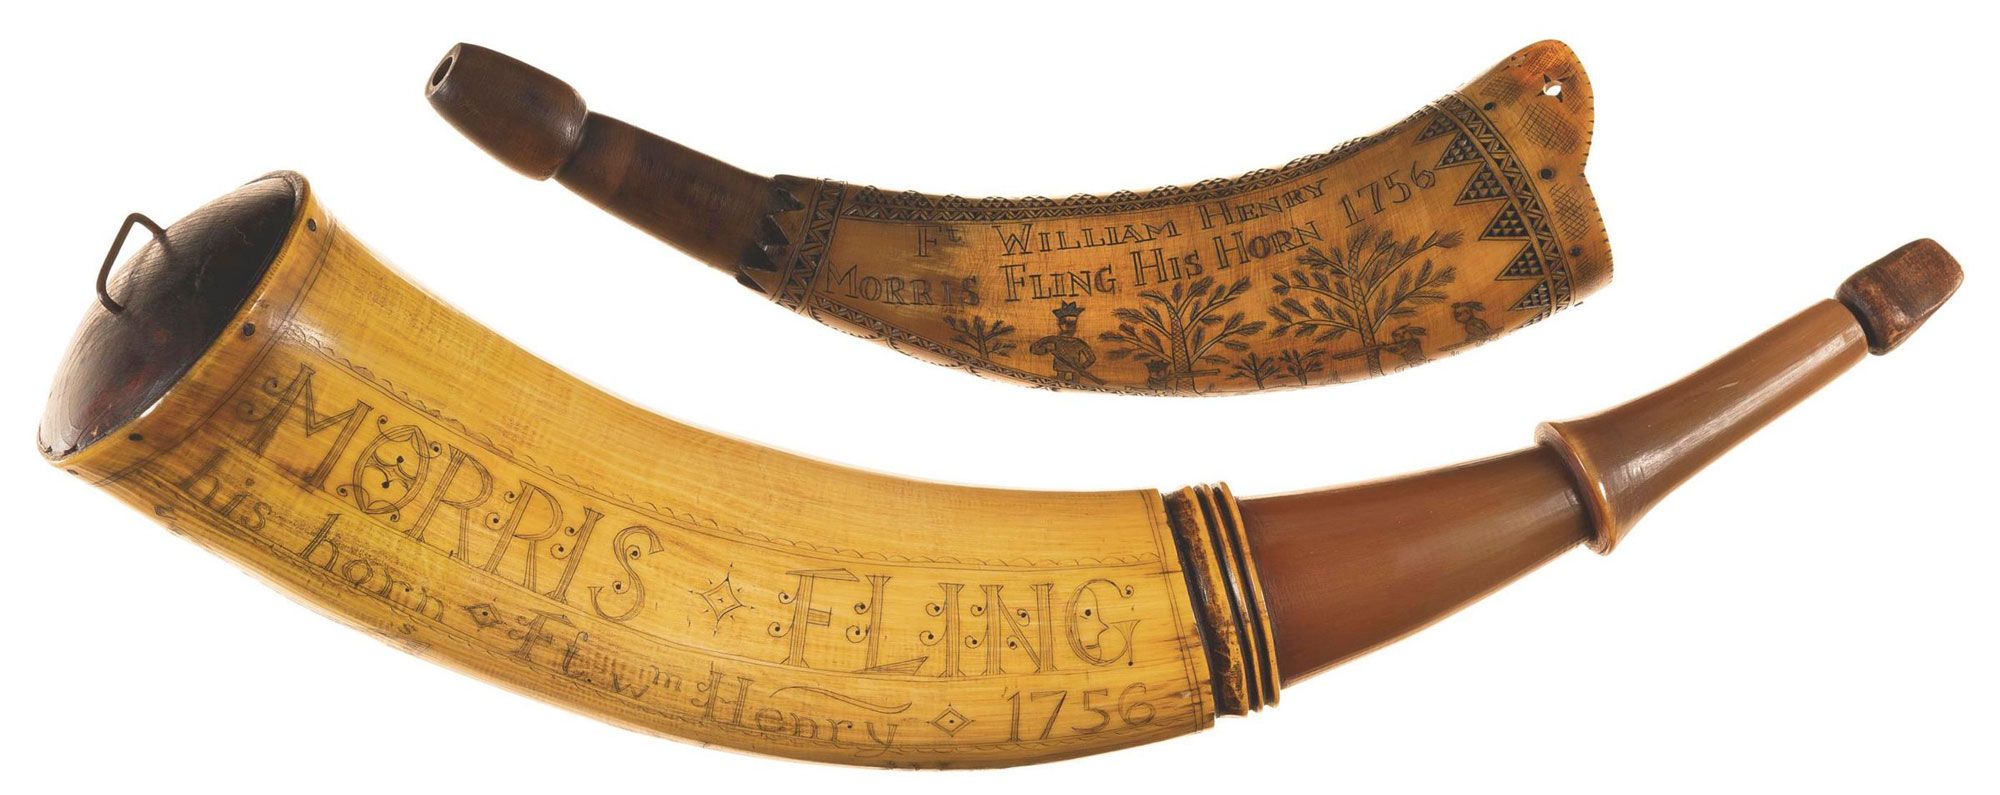 Lot 4091: Two Contemporary French & Indian War Themed Powder Horns